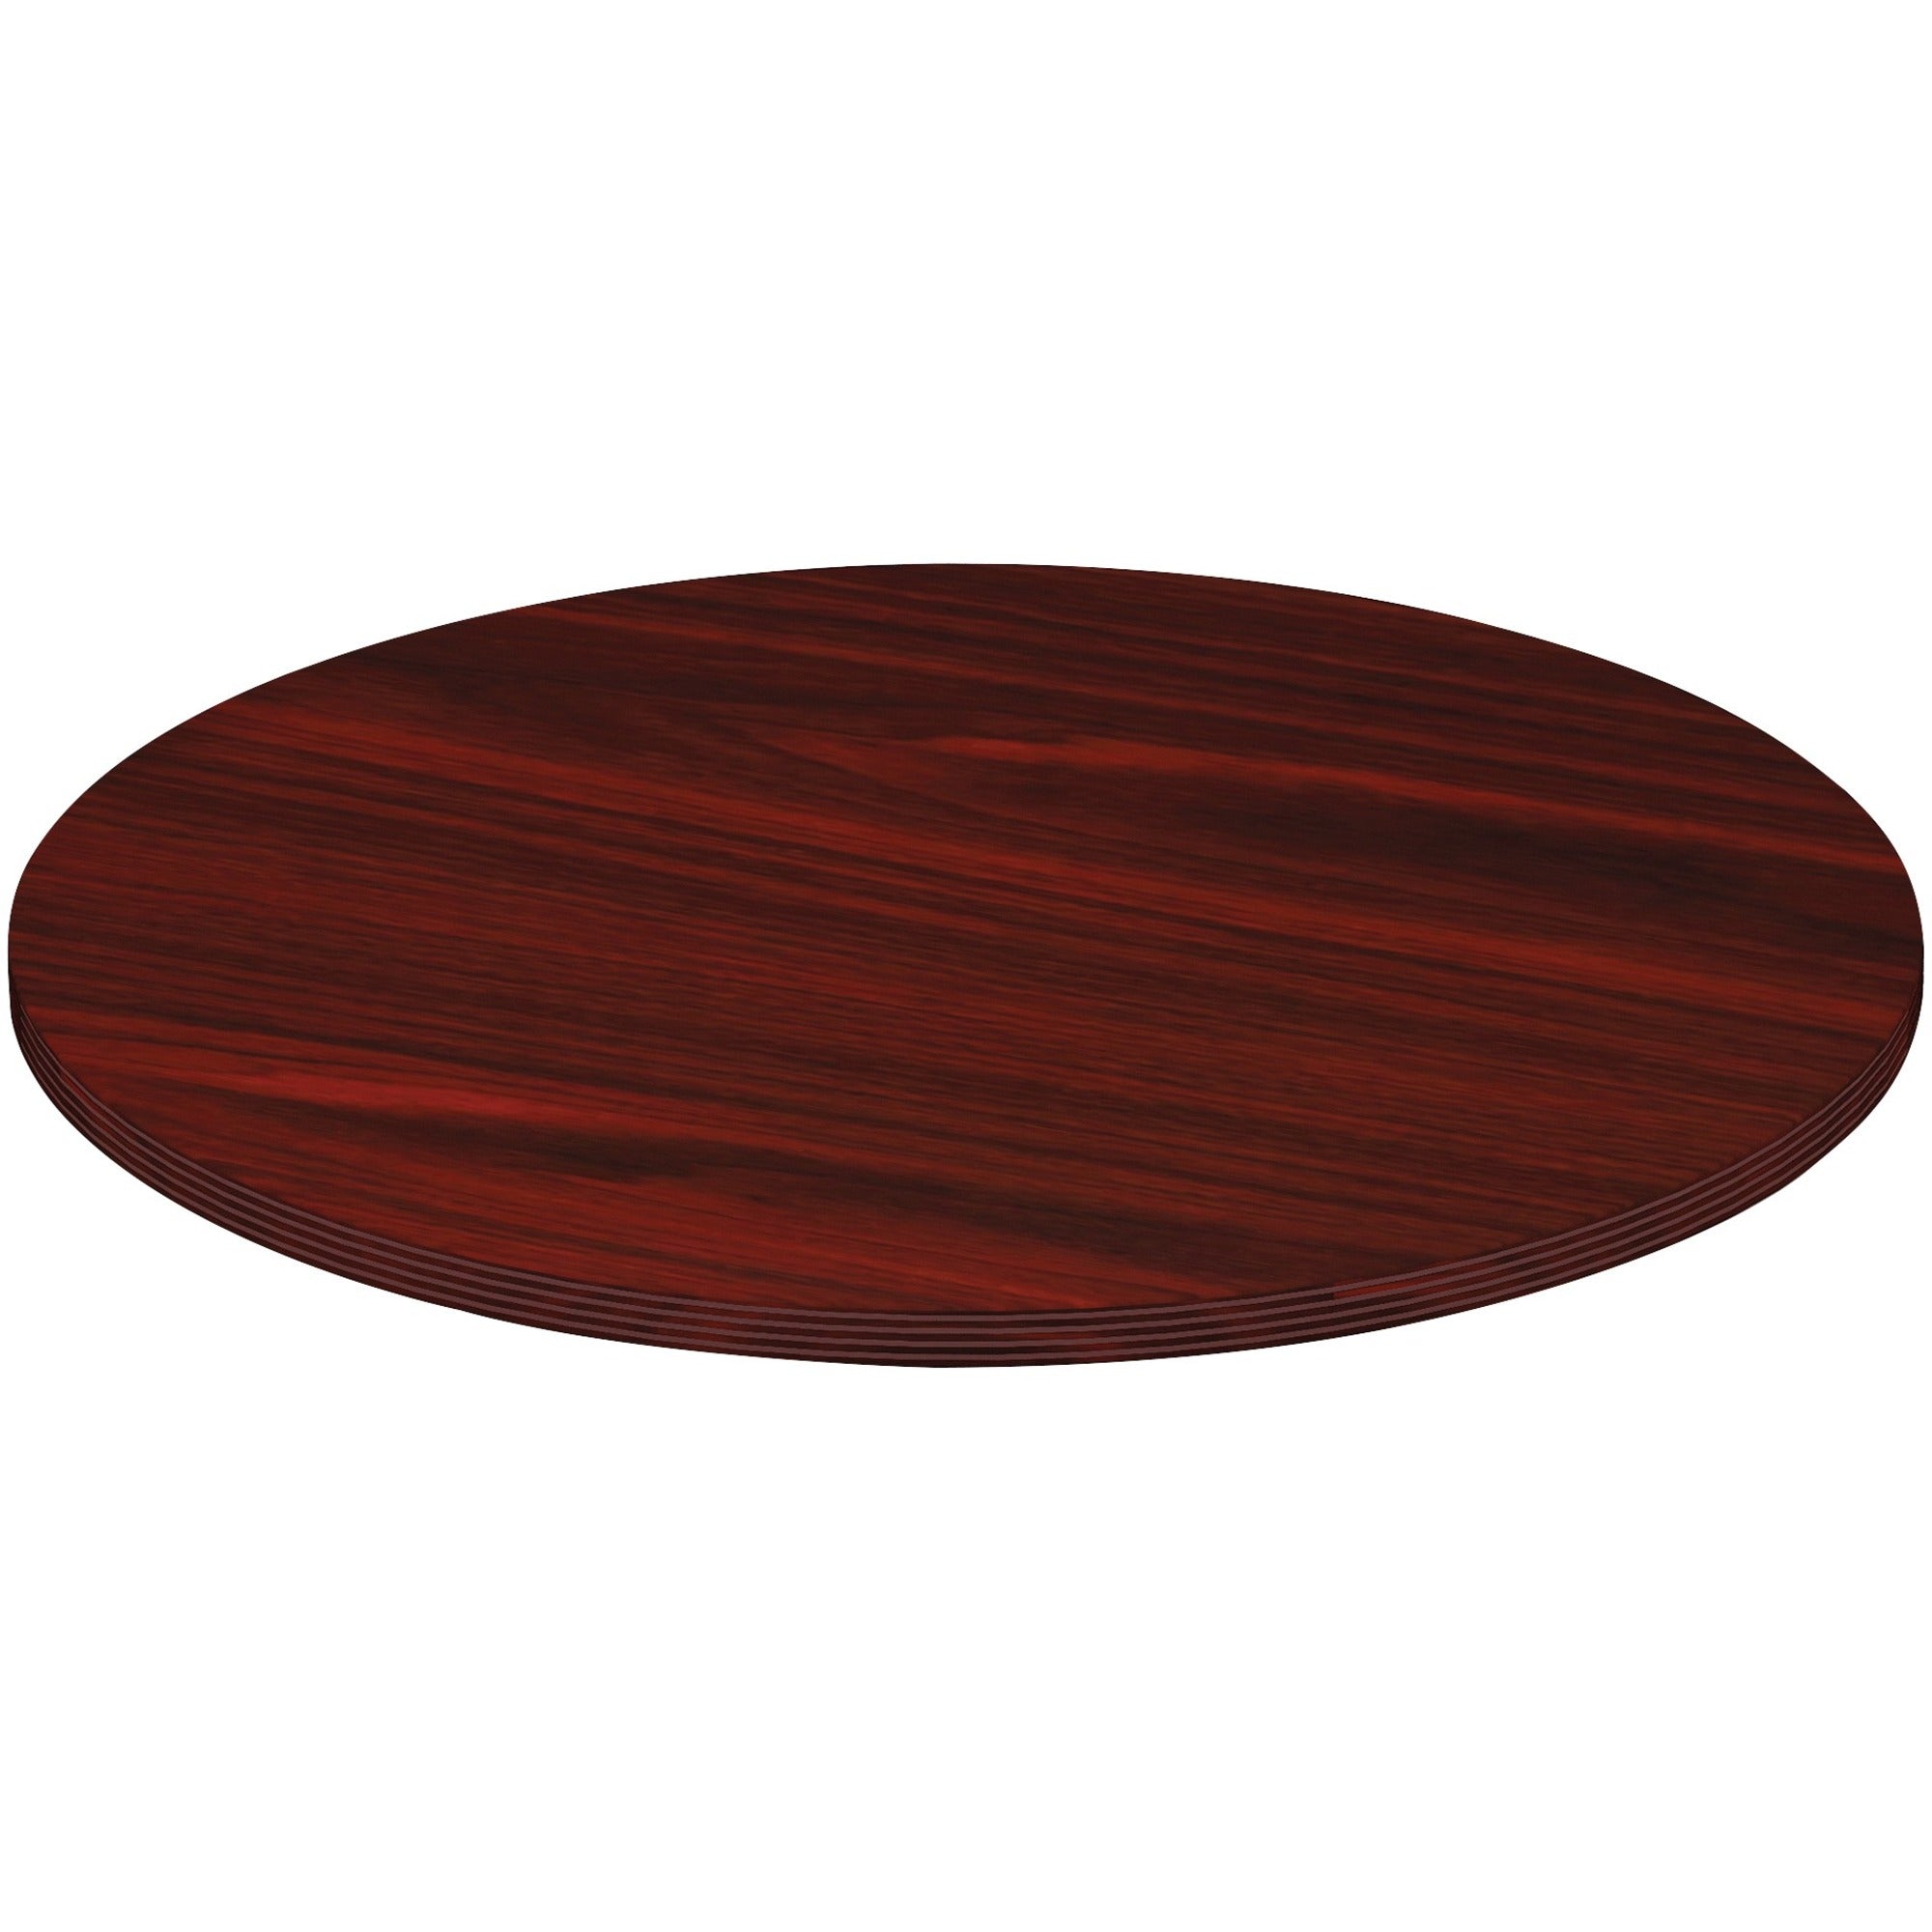 lorell-chateau-series-round-conference-tabletop-42--01-edge-reeded-edge-finish-mahogany-laminate_llr34352 - 1